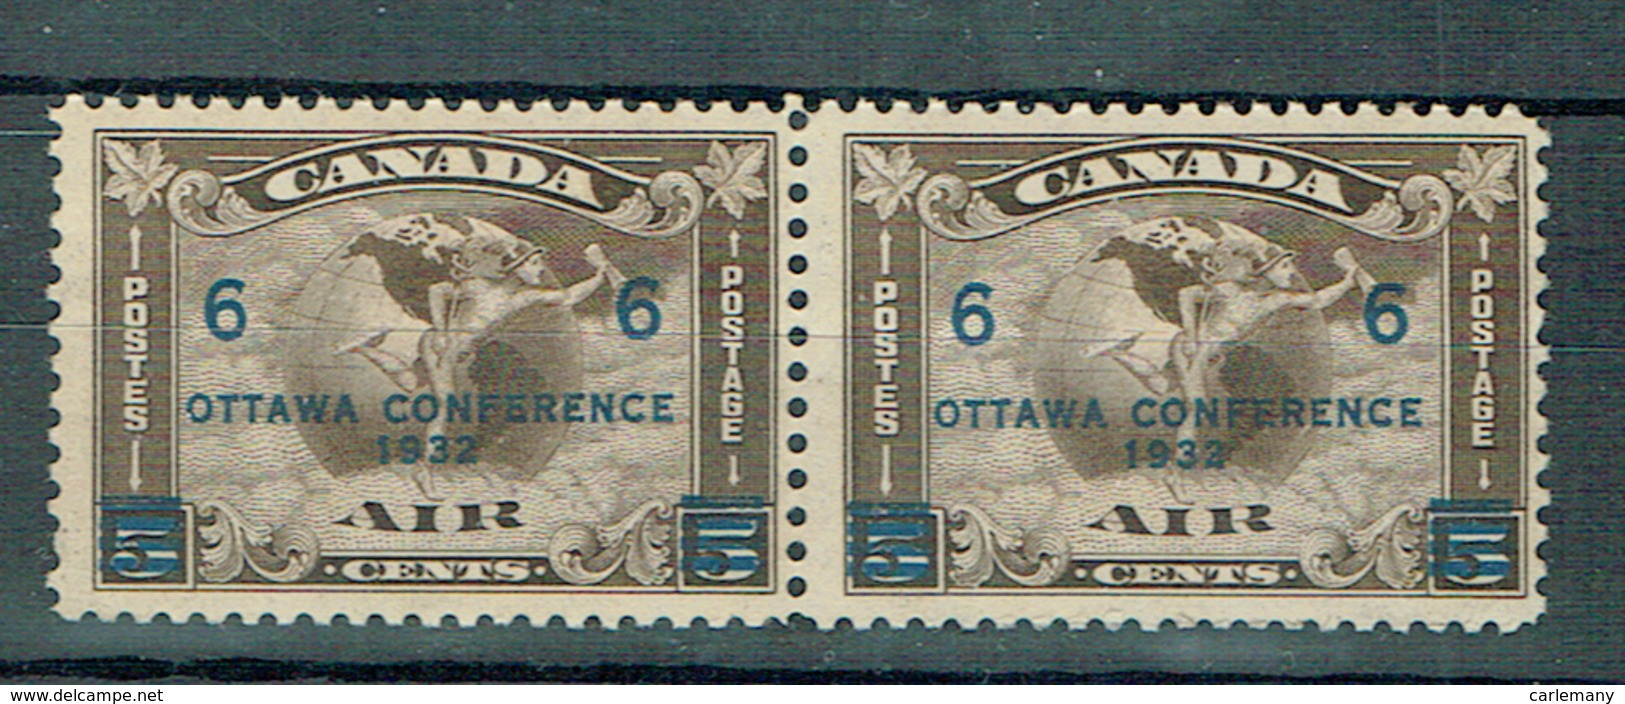 TIMBRES CANADA STAMPS MI 170 CONFERENCE OTTAWA 1932 PAIR TIMBRES  SG 318 - Neufs